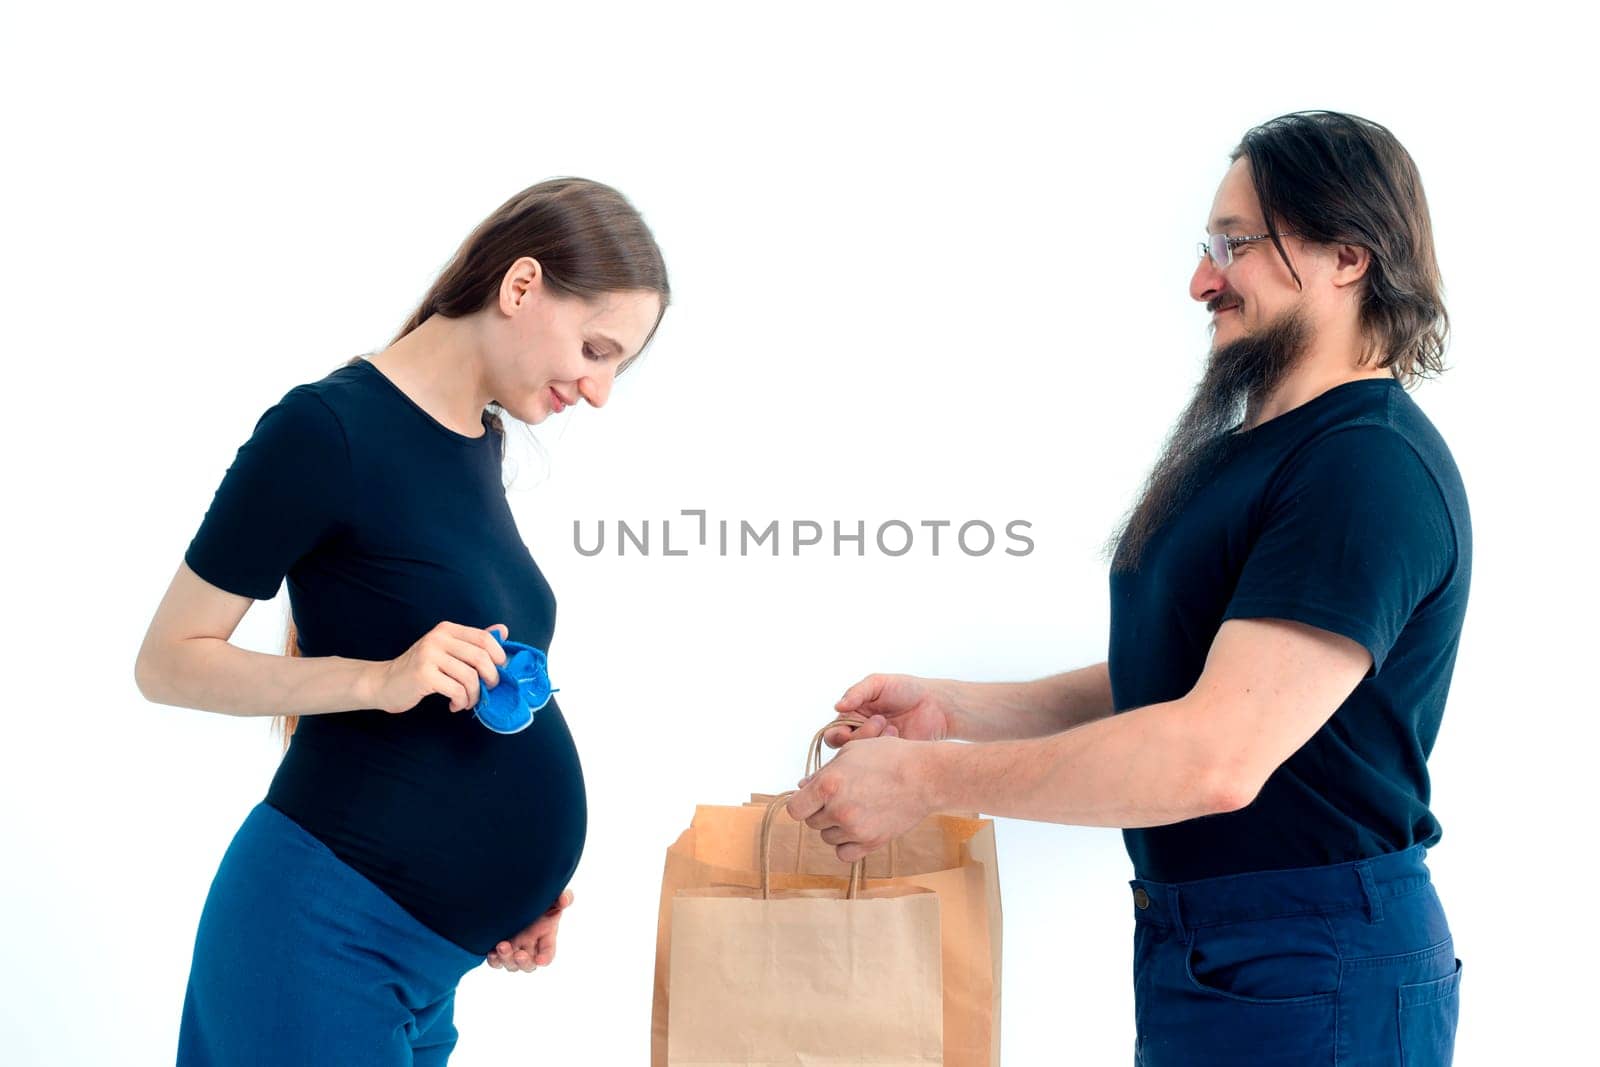 pregnancy, shopping, parenthood and happiness concept - happy young family with shopping bags by kajasja